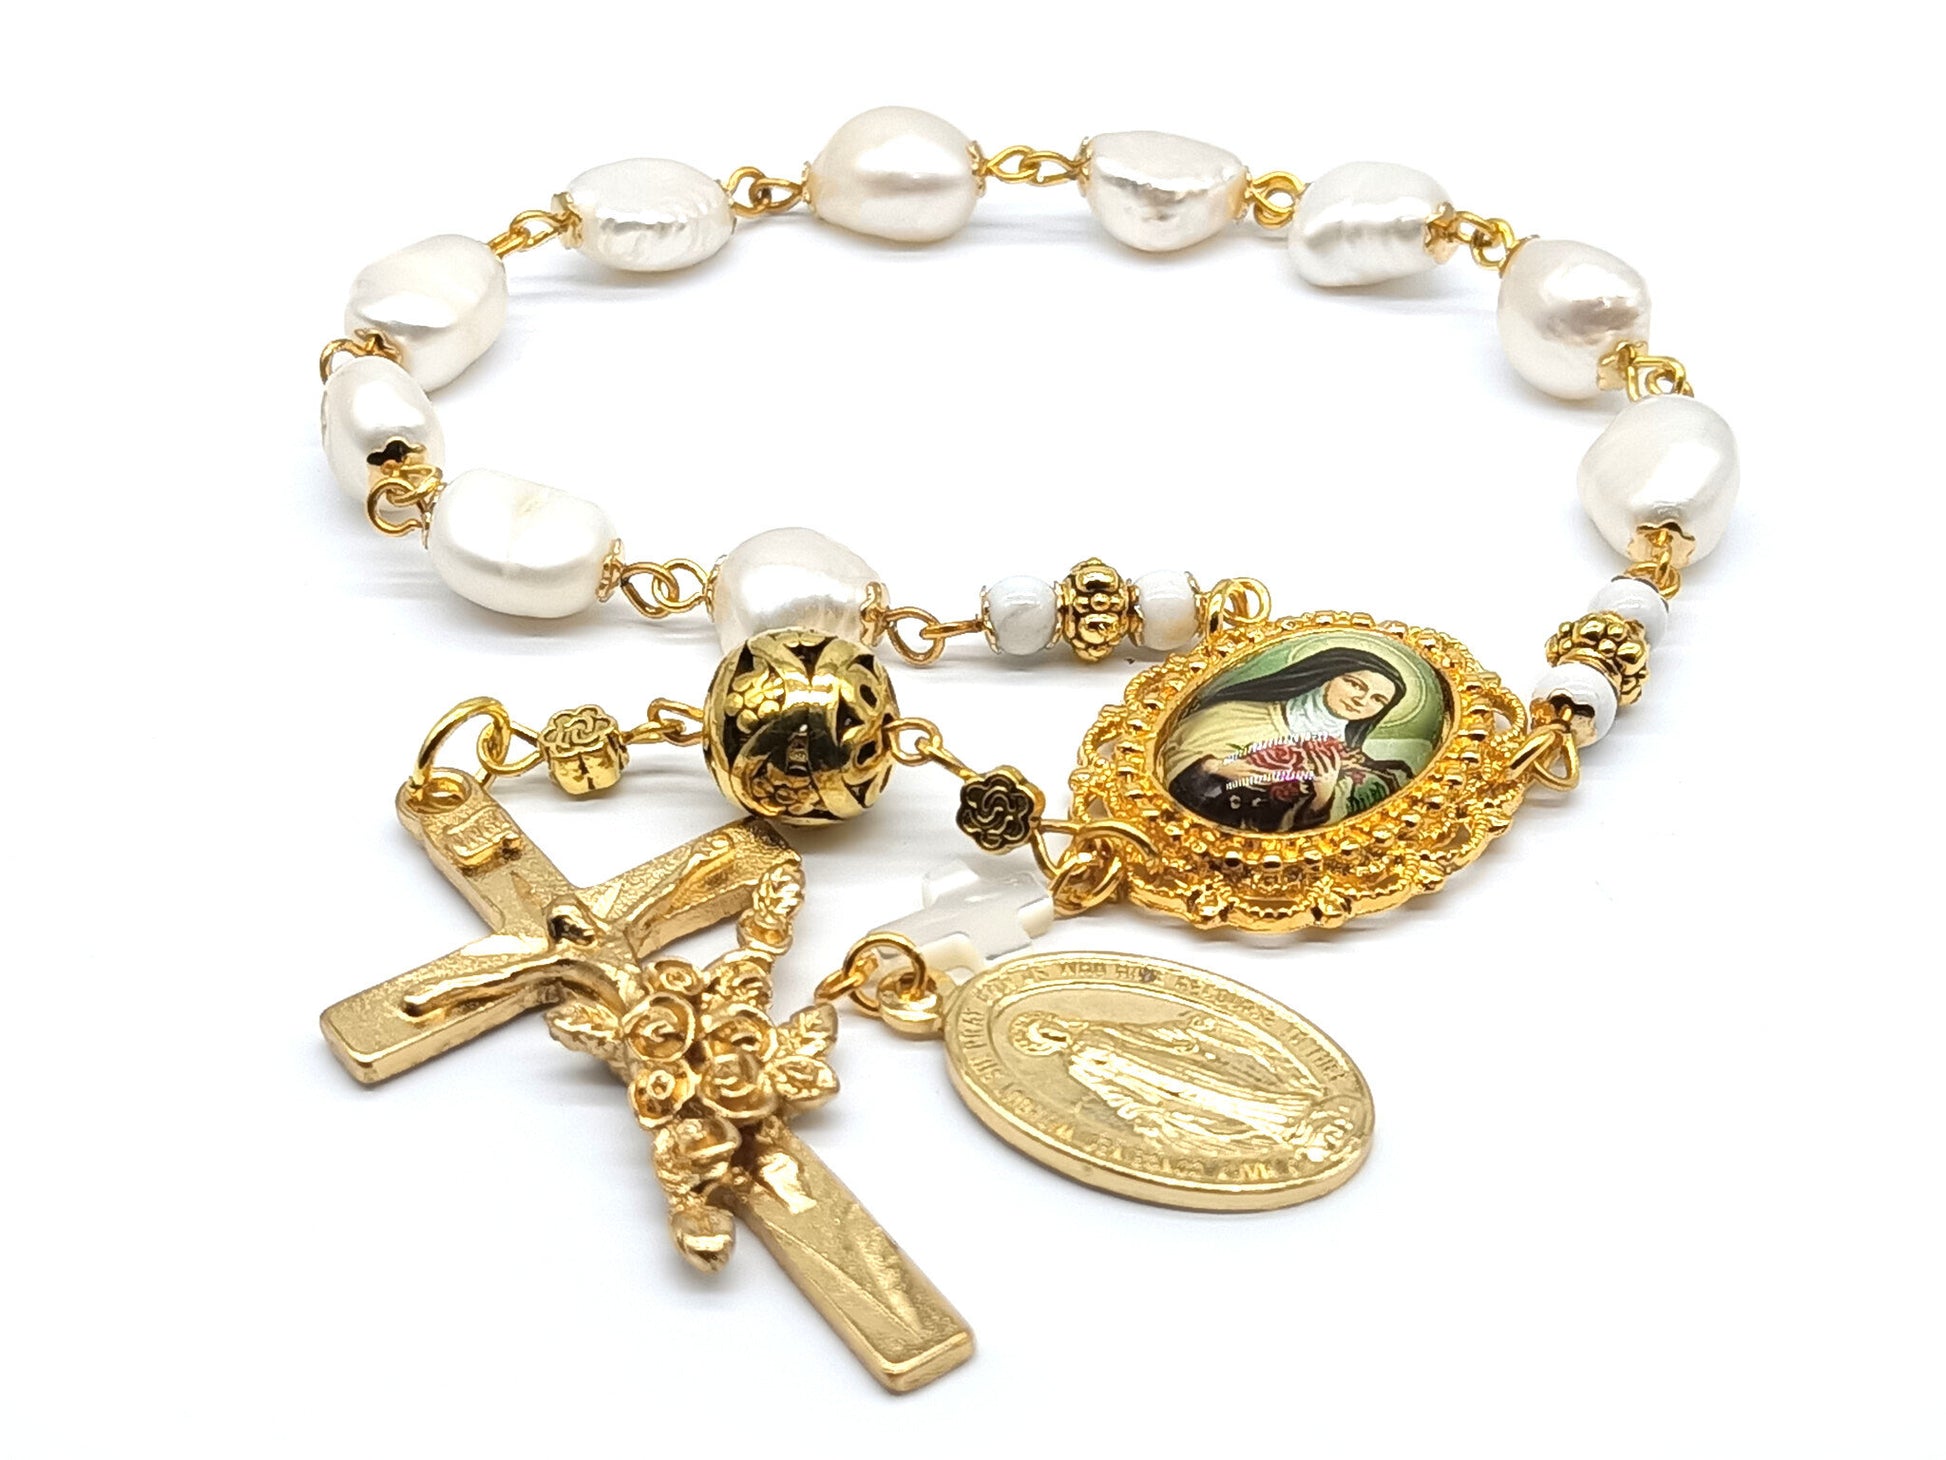 Genuine pearl unique rosary beads single decade with gold crucifix, miraculous medal and Saint Therese of Lisieux picture medal.